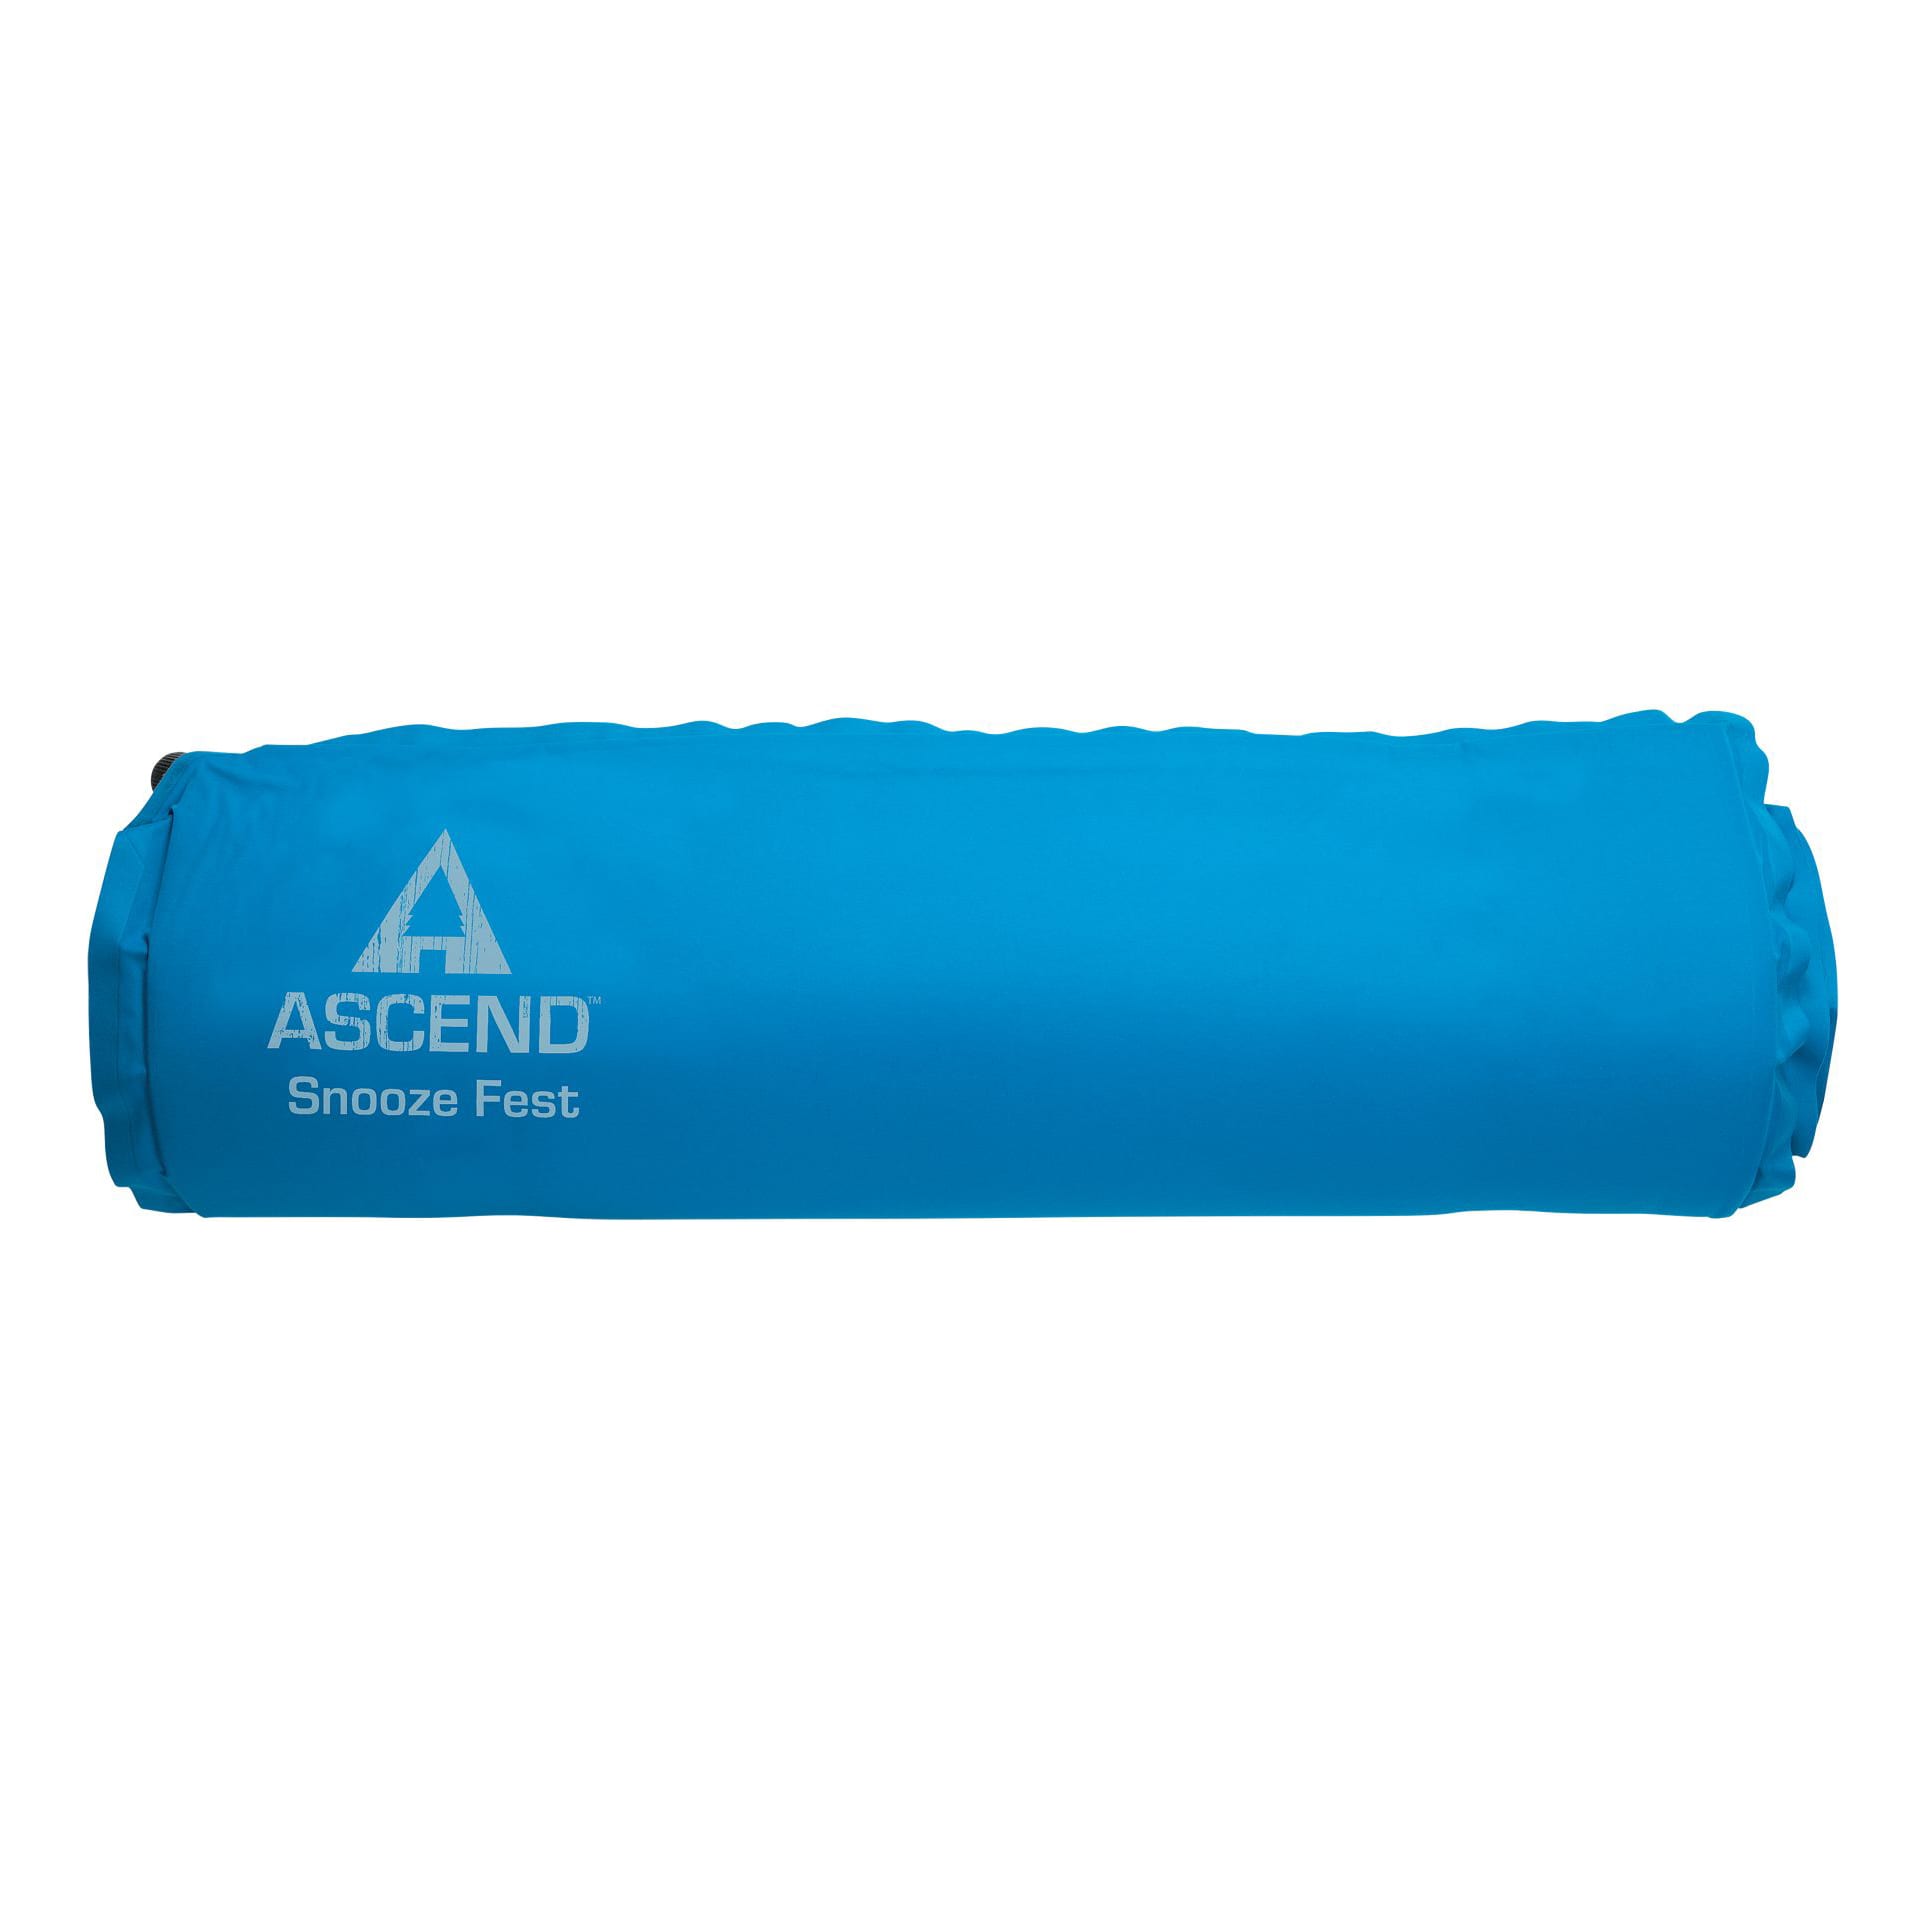 Ascend Snooze Fest Self-Inflating Sleeping Pad - Rolled Up View